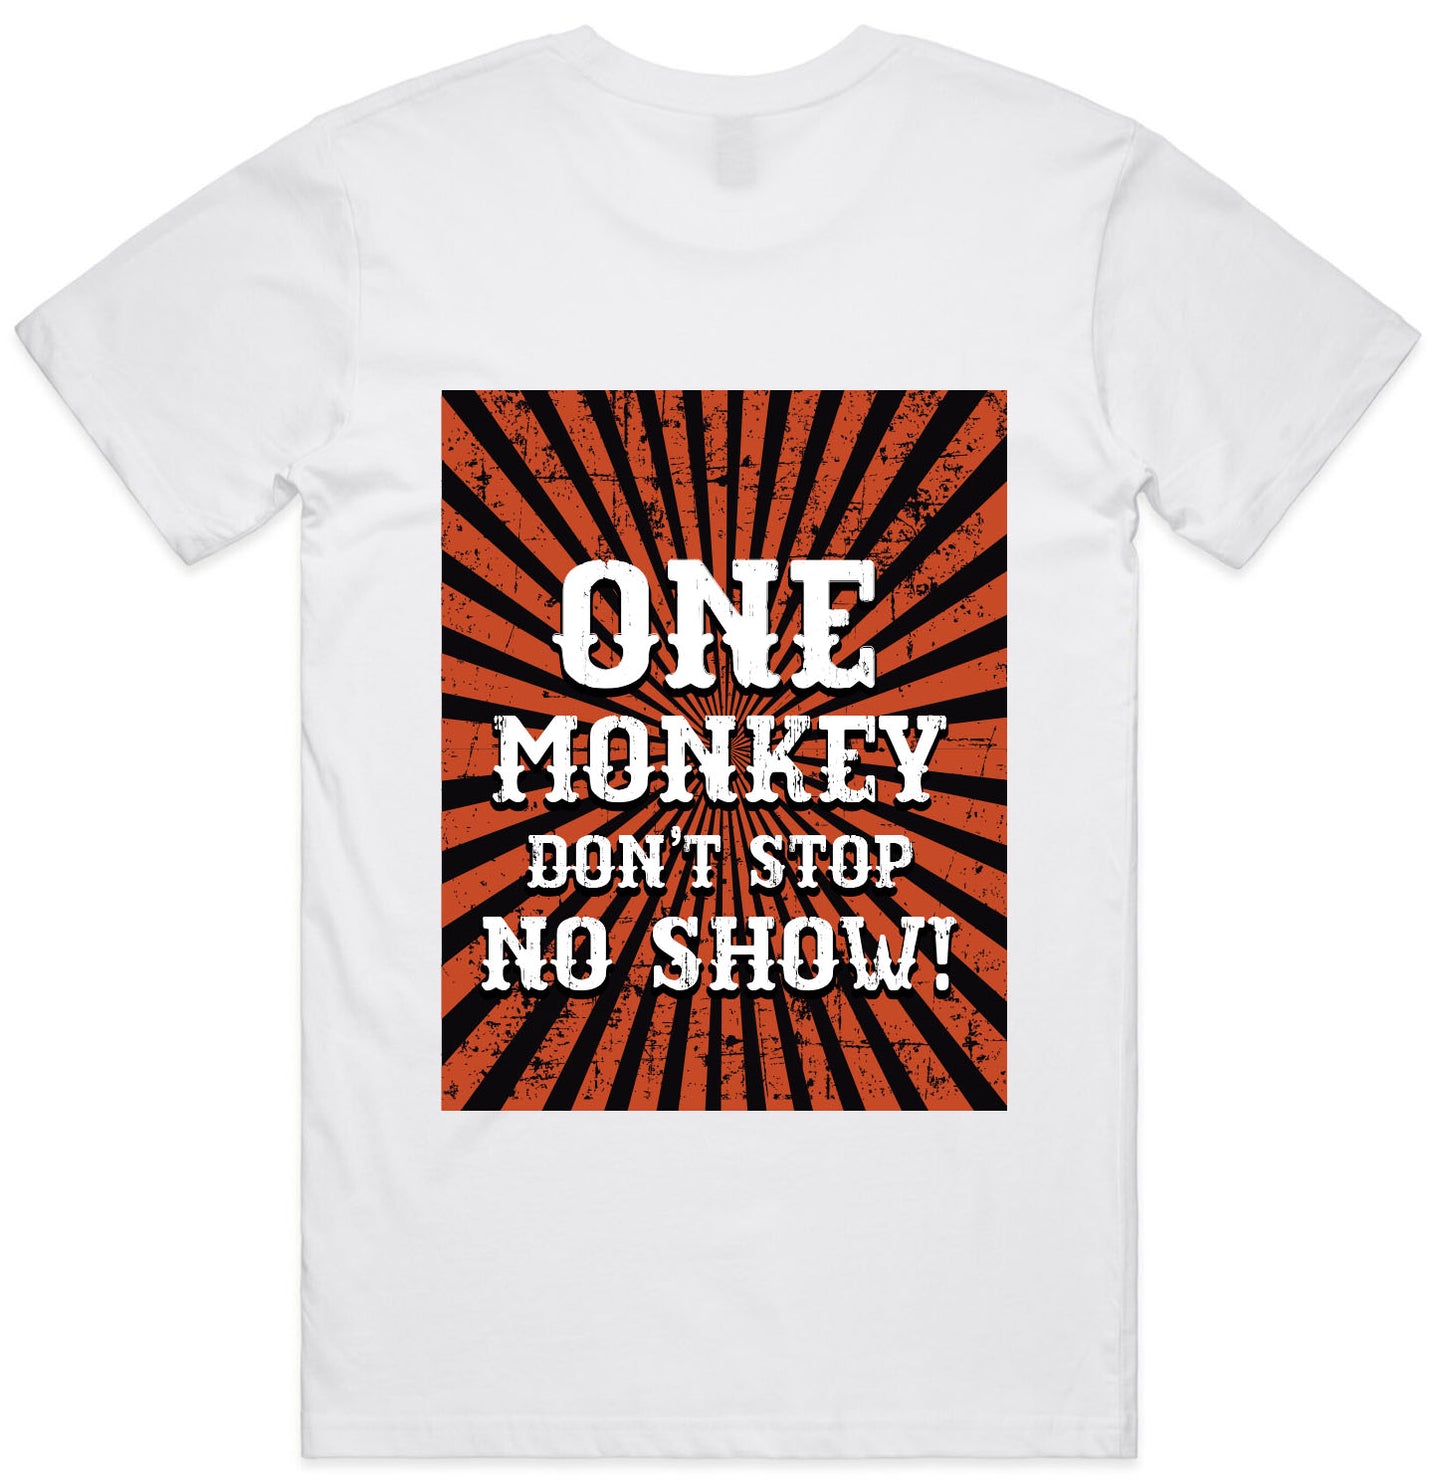 The Show Must Go On Tee